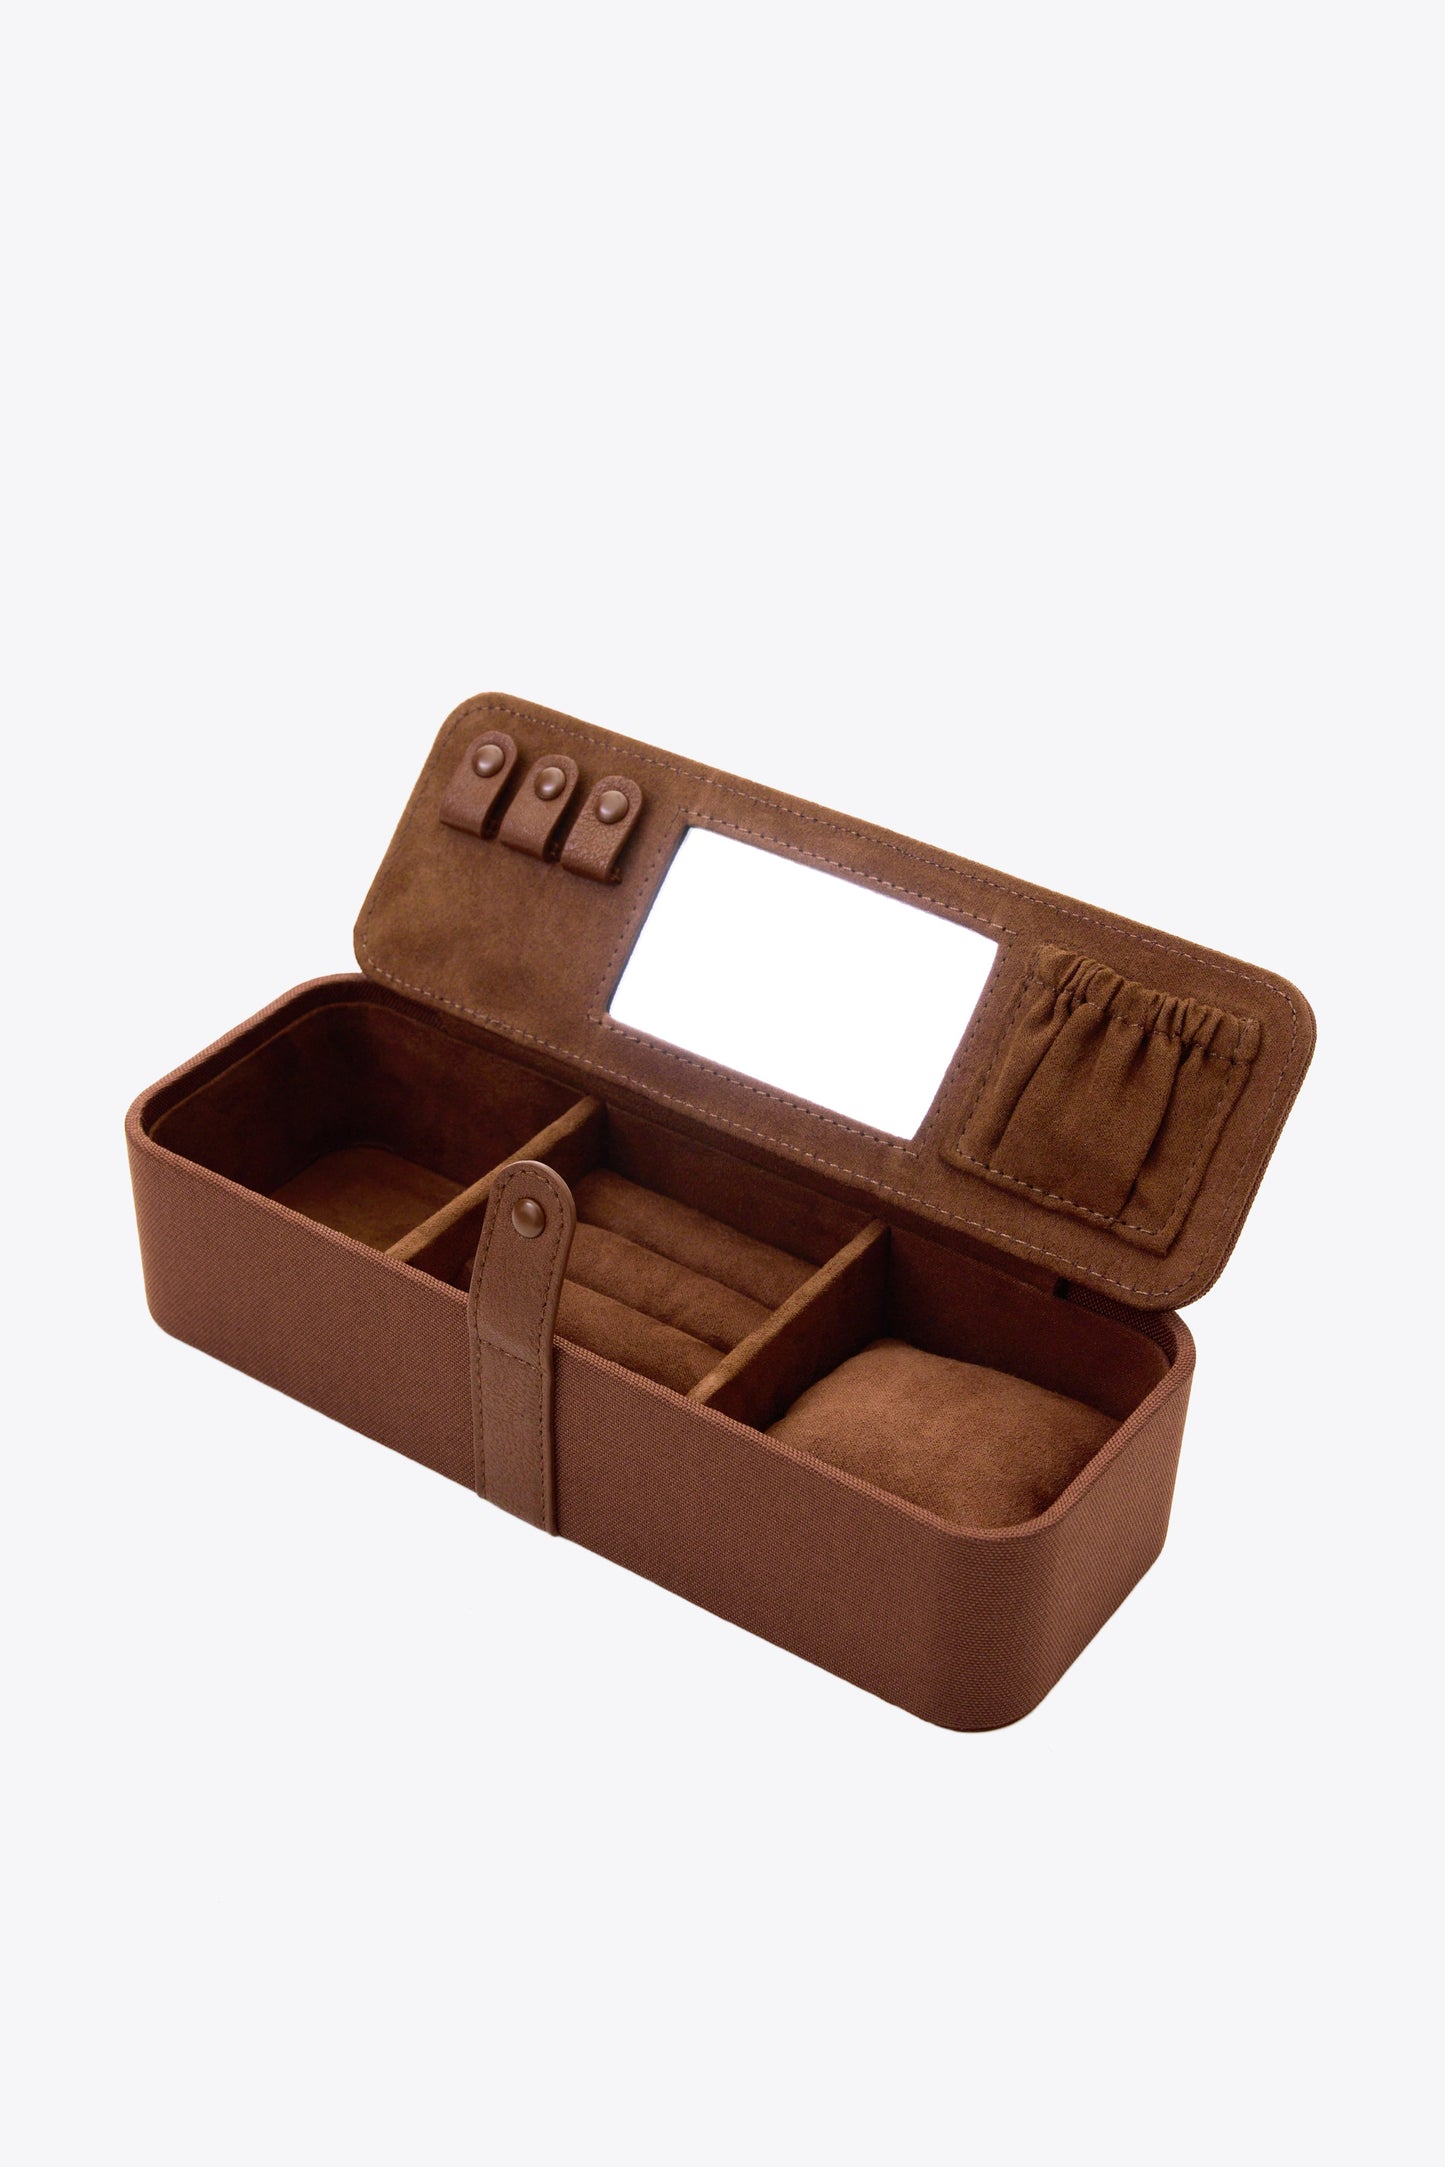 The Jewelry Case in Maple